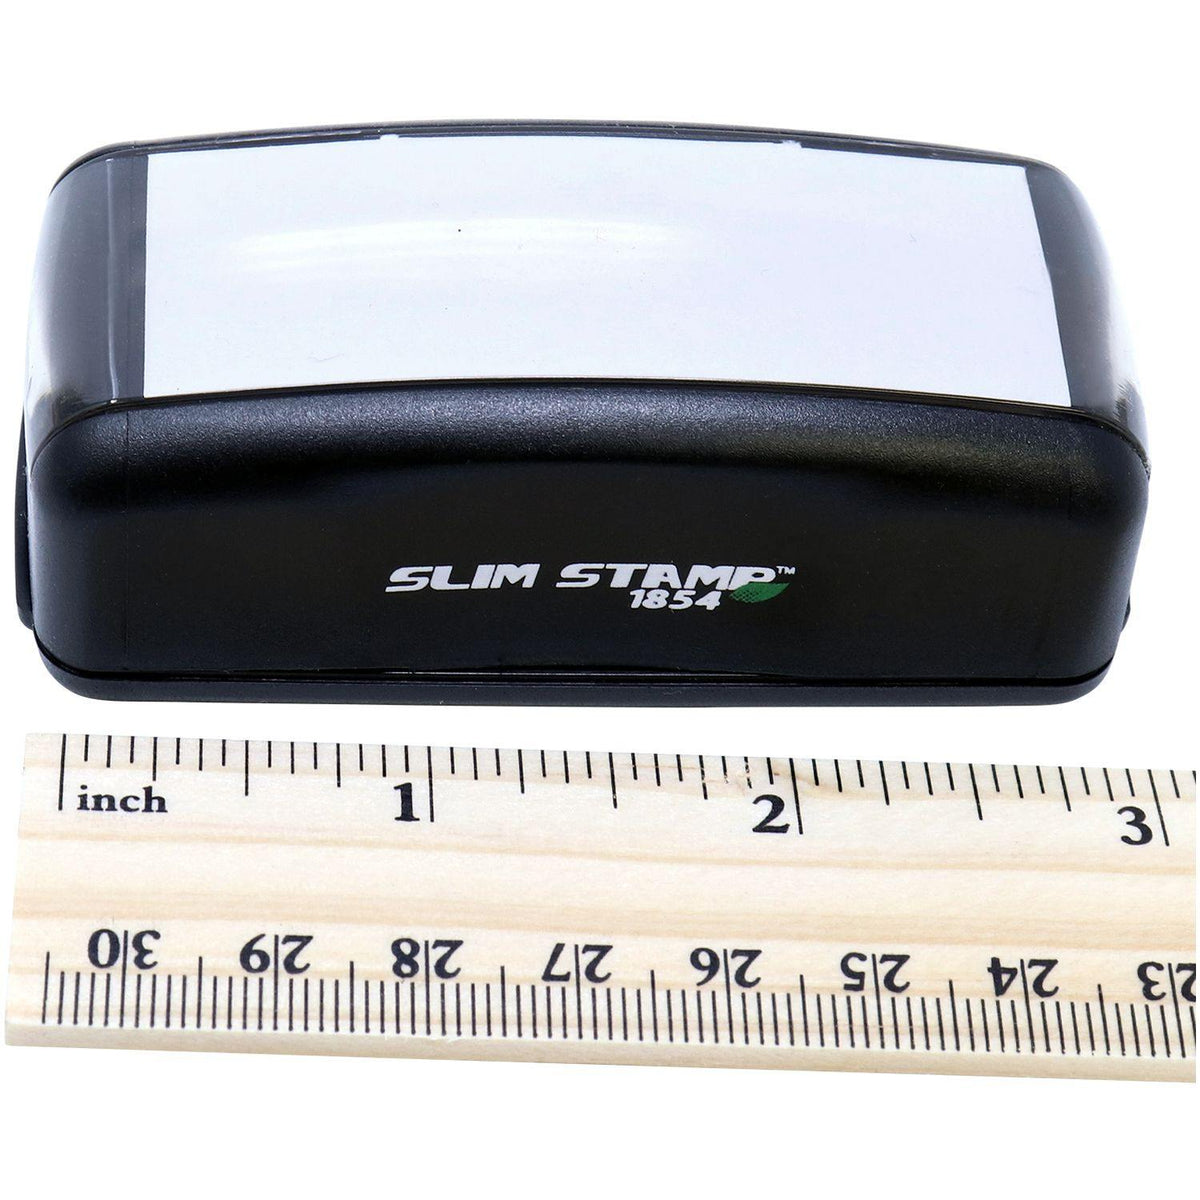 Measurement Large Pre-Inked No Negociable Stamp with Ruler